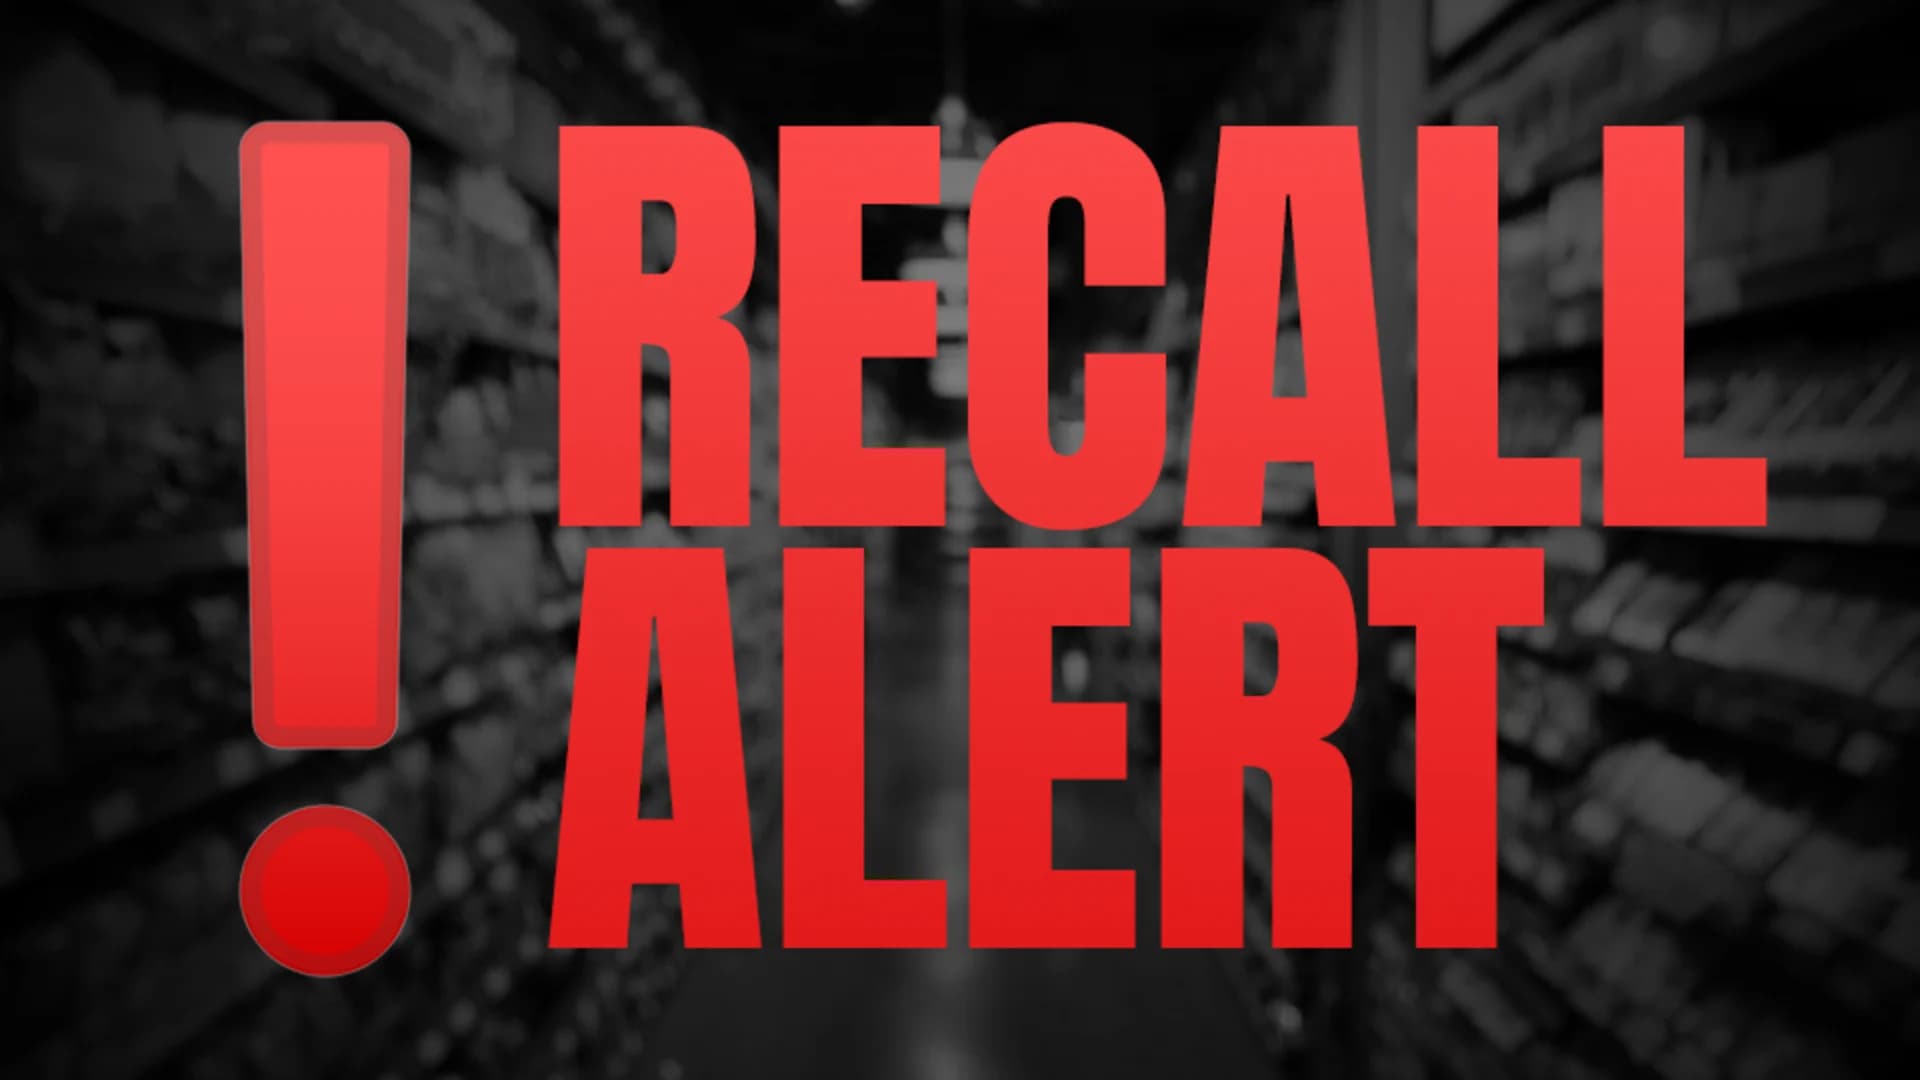 New Jersey-based company recalls number of ShopRite -brand chicken products